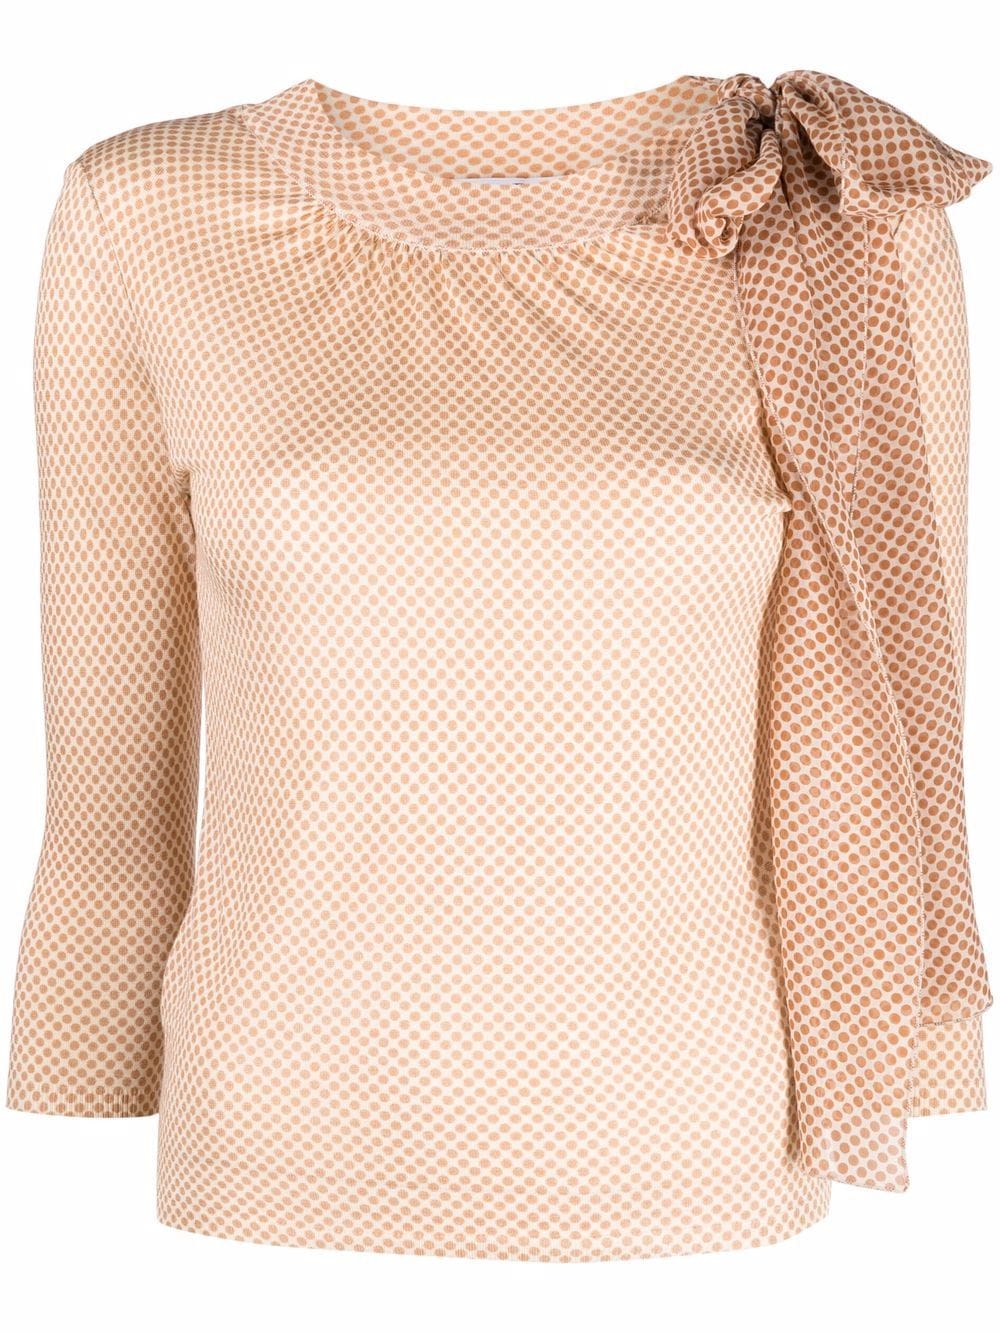 Christian Dior Pre-Owned 2010s bow detailing polka dot blouse - Brown von Christian Dior Pre-Owned